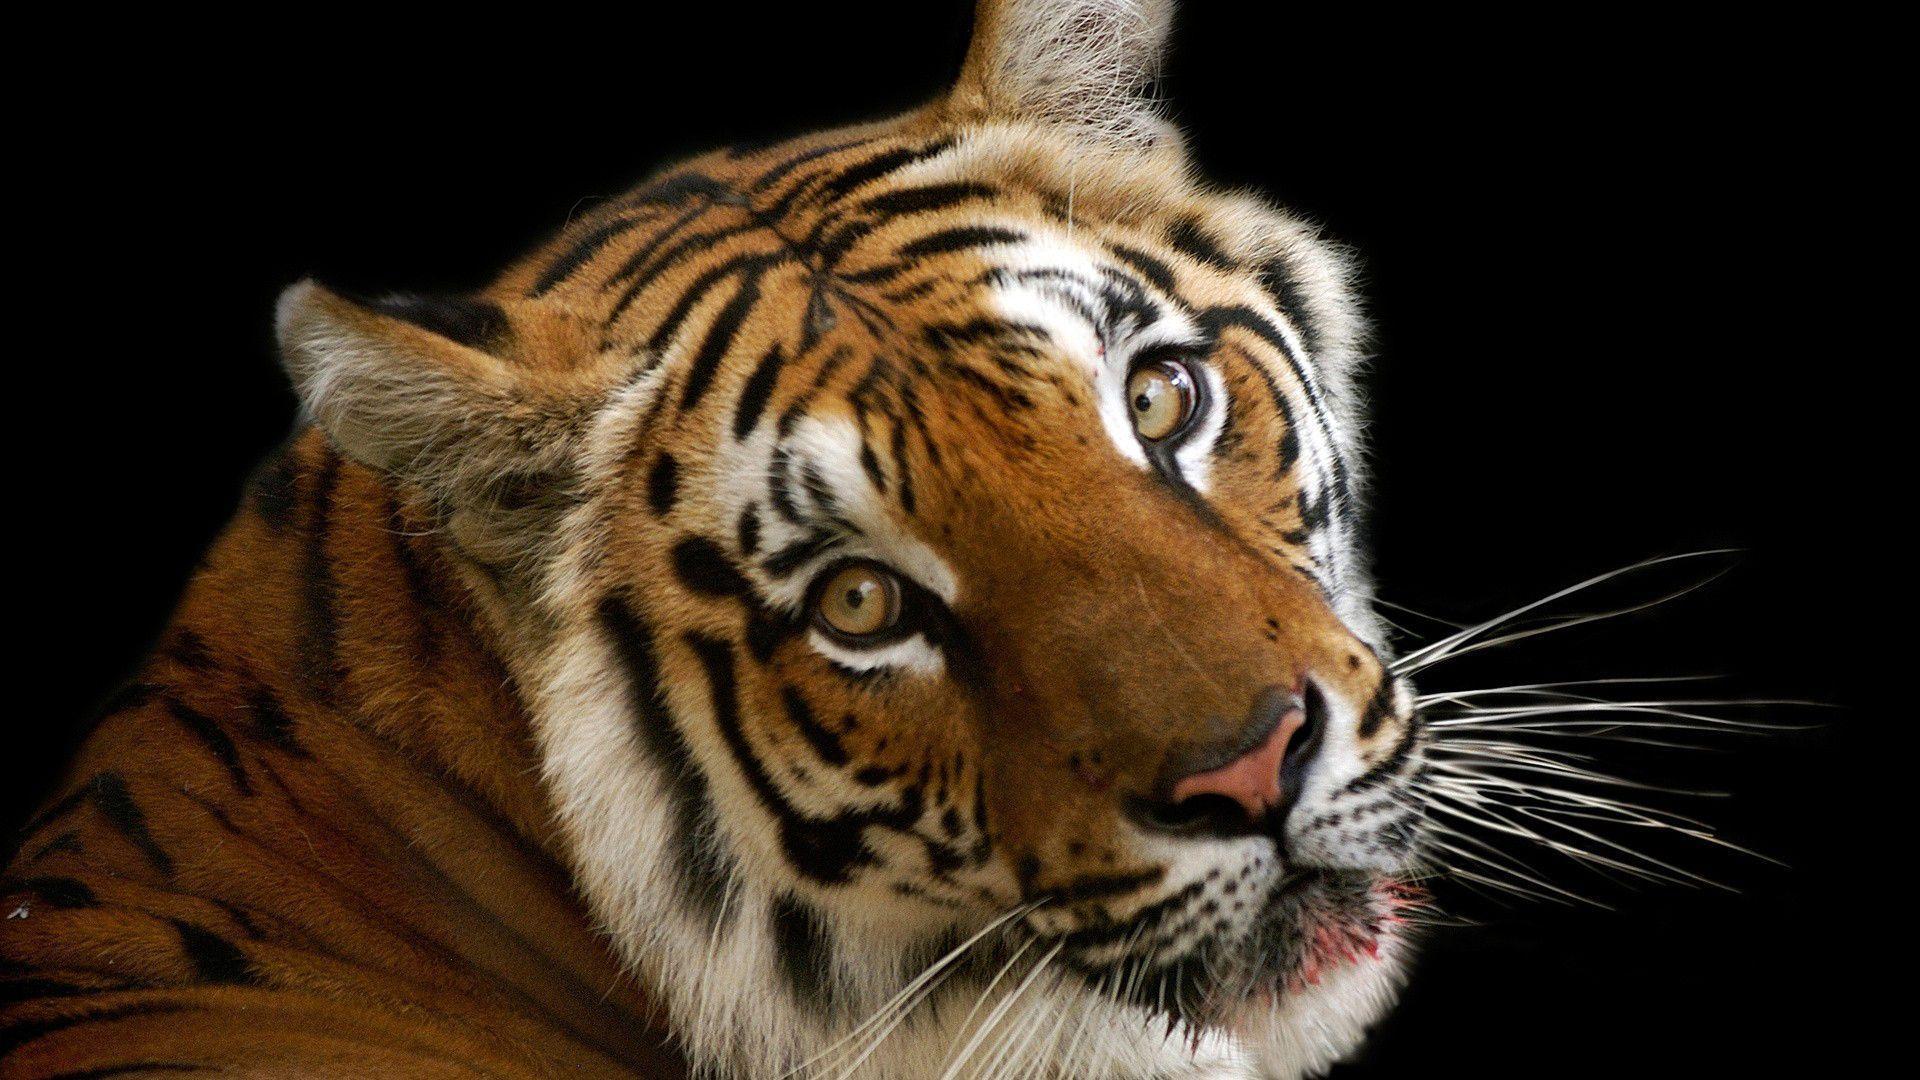 angry Tiger Face HD wallpaper download